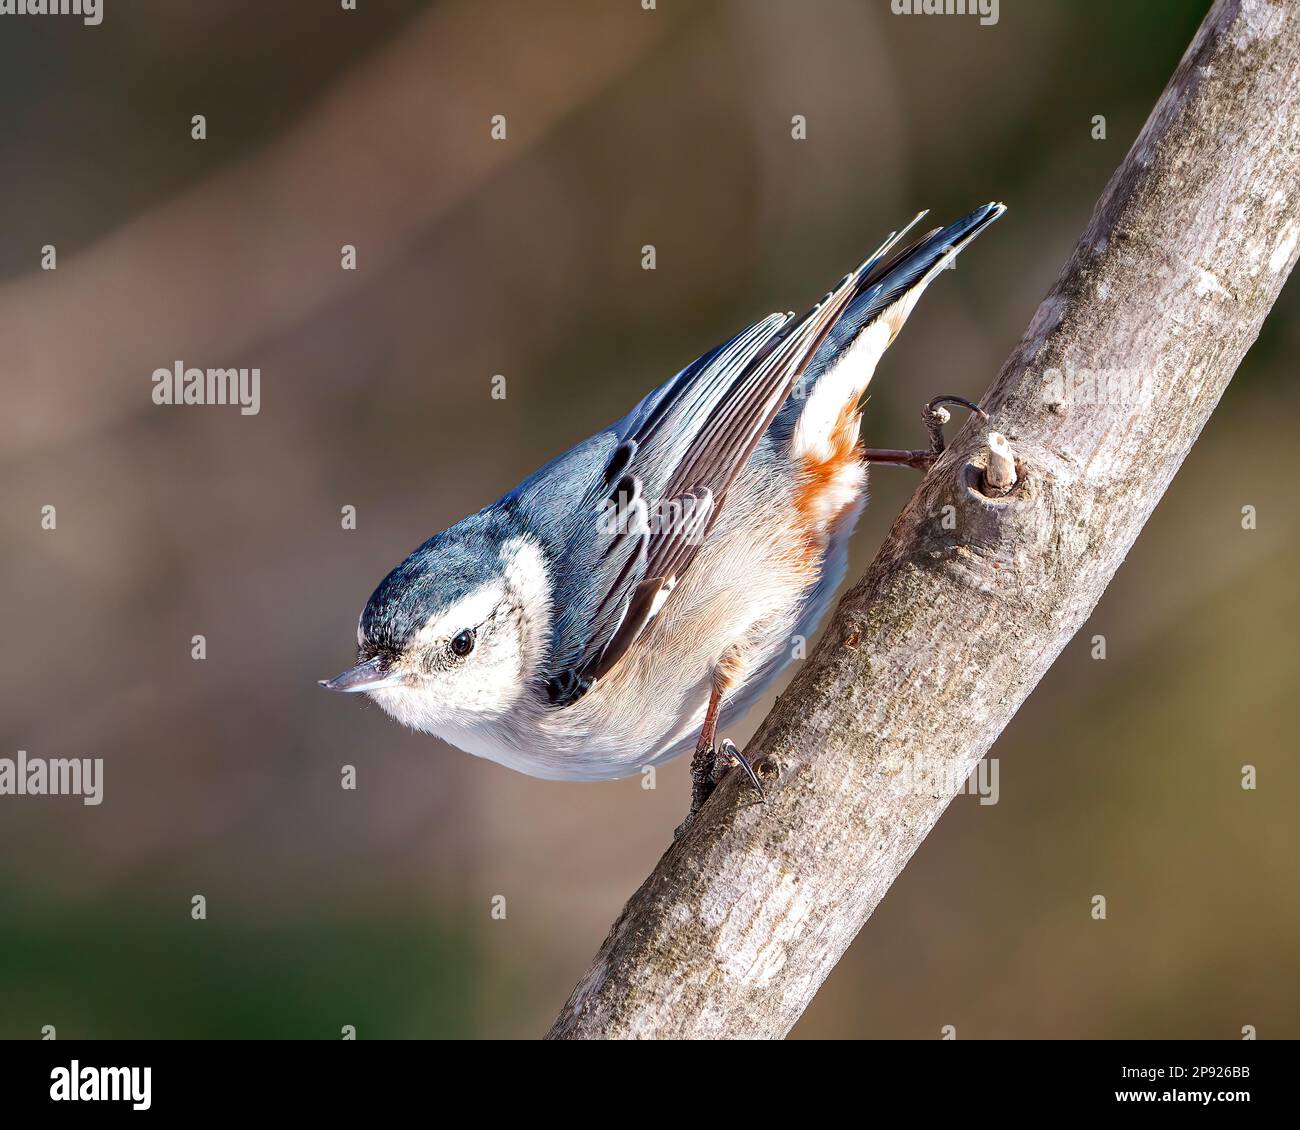 White-breasted Nuthatch perched on a tree branch with a blur background in its environment and habitat surrounding. Nuthatch Portrait. Stock Photo